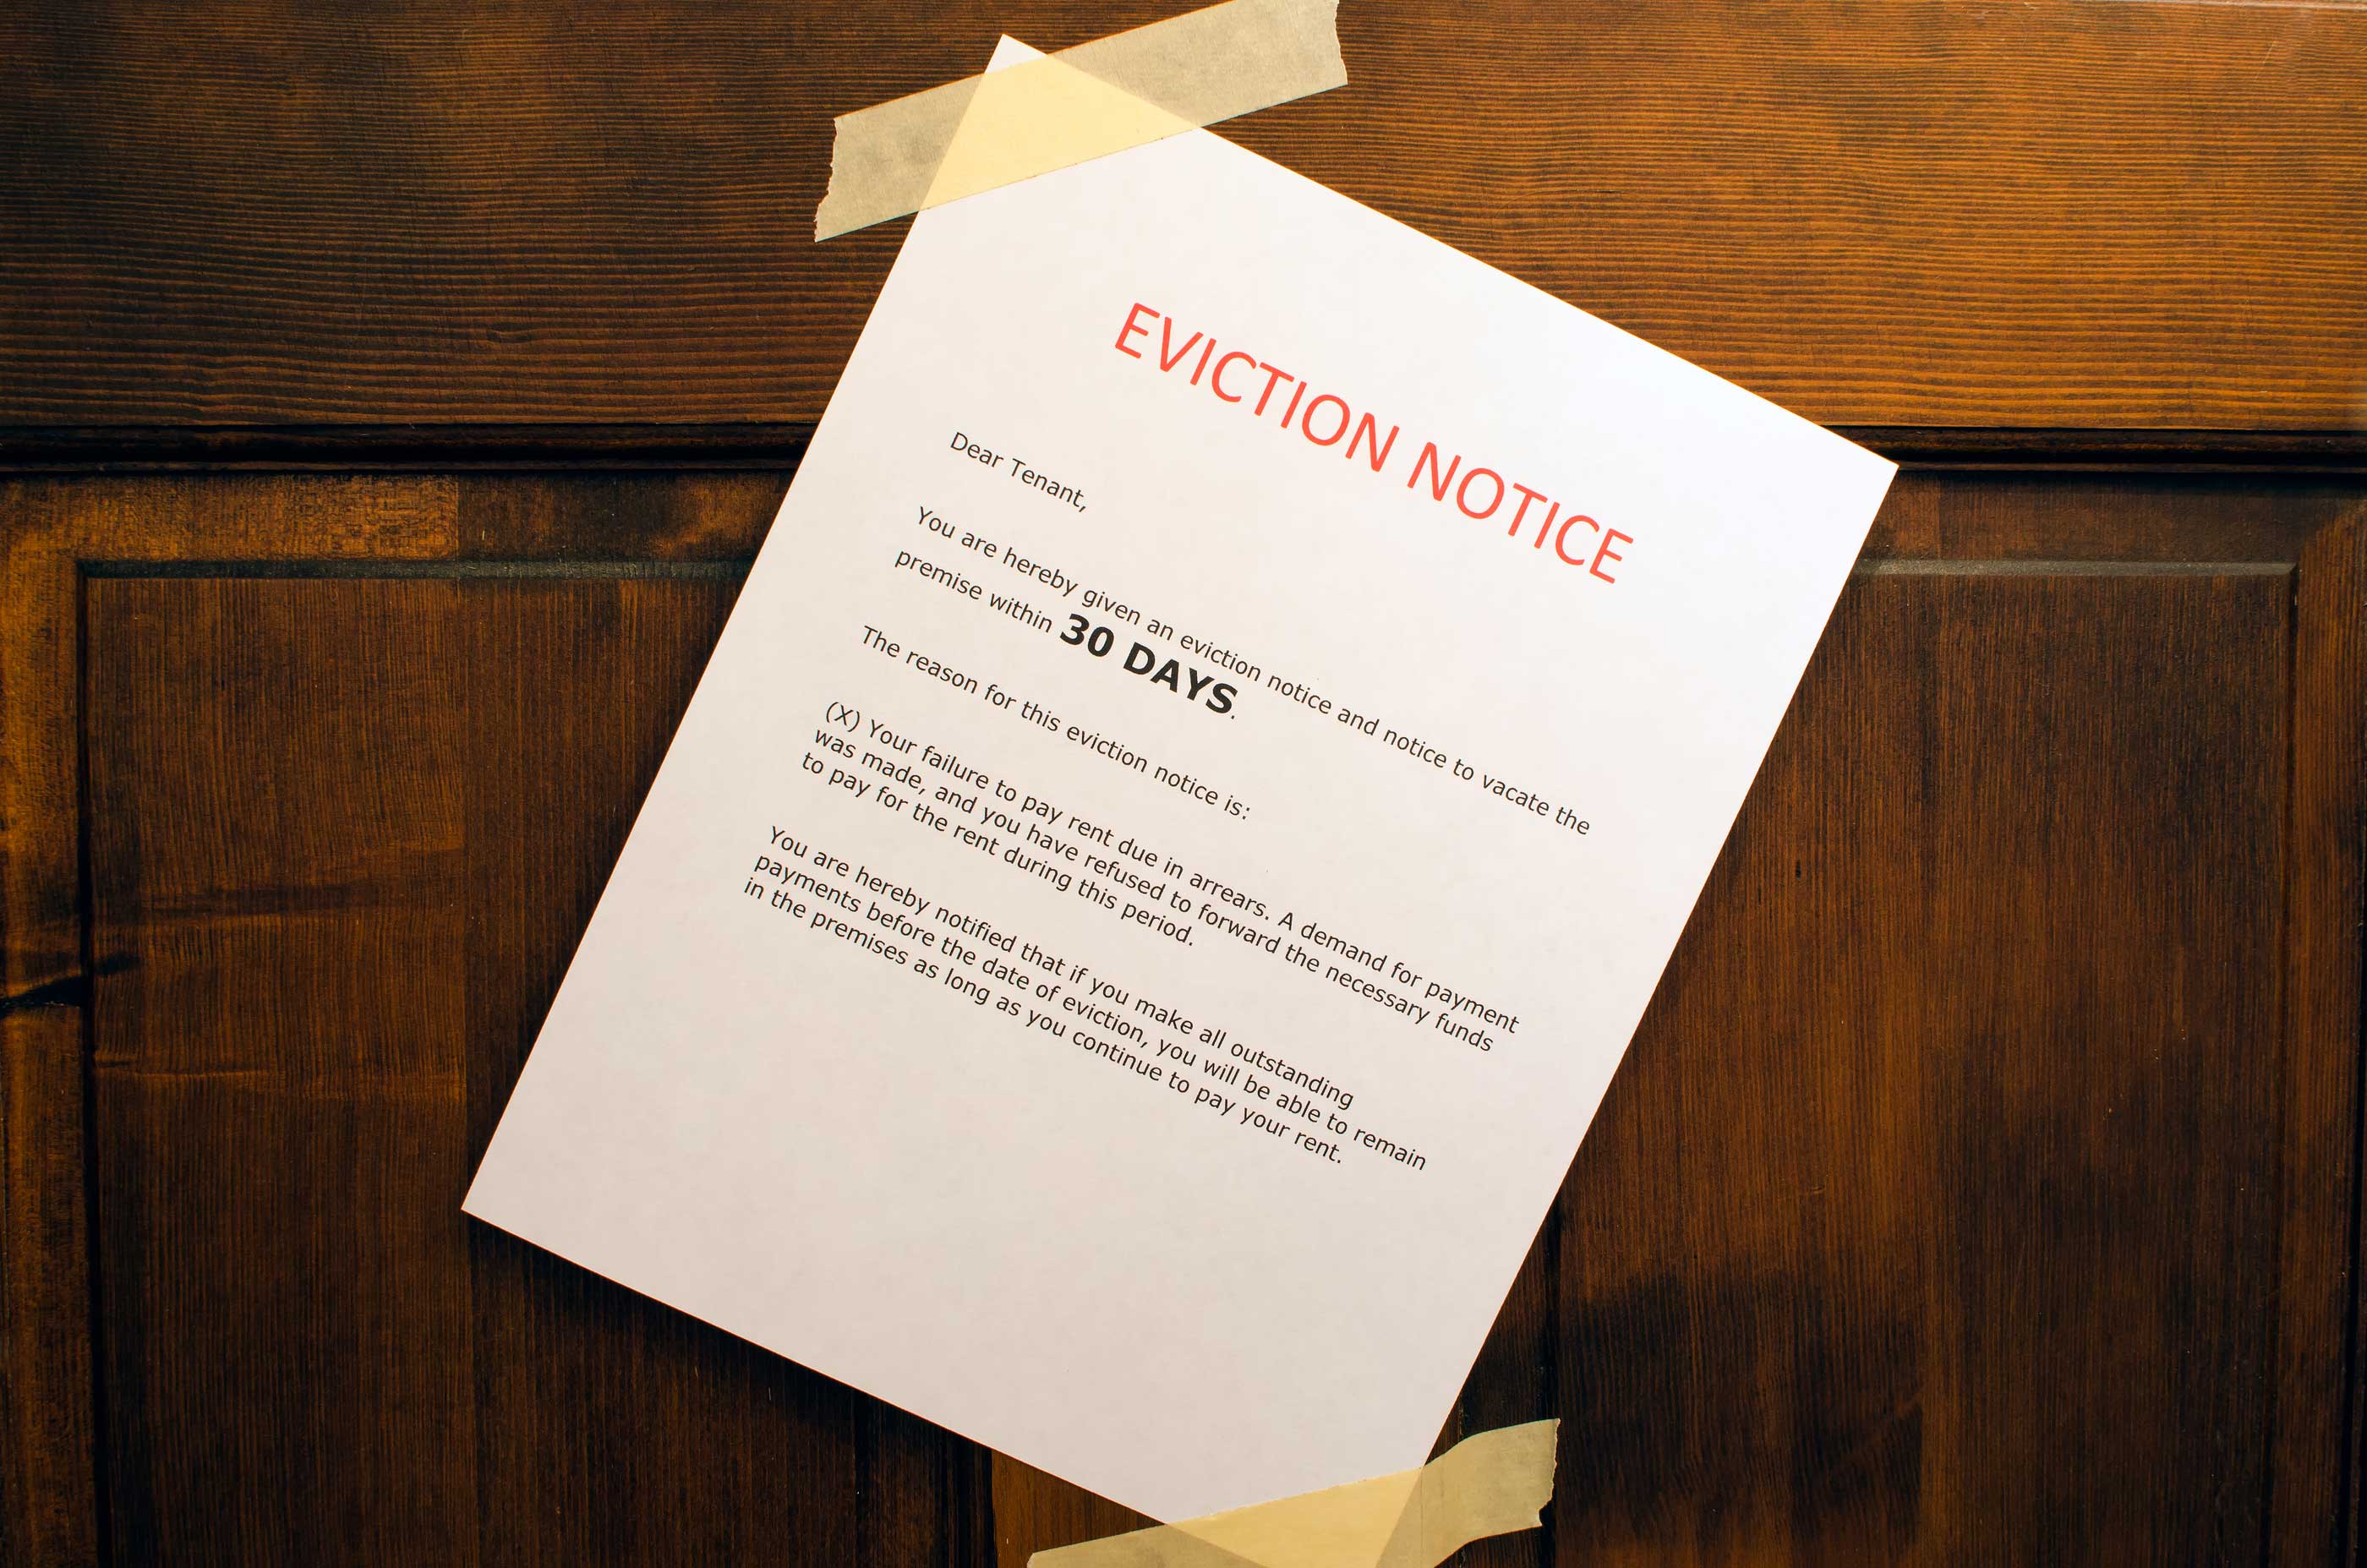 How to write an eviction notice